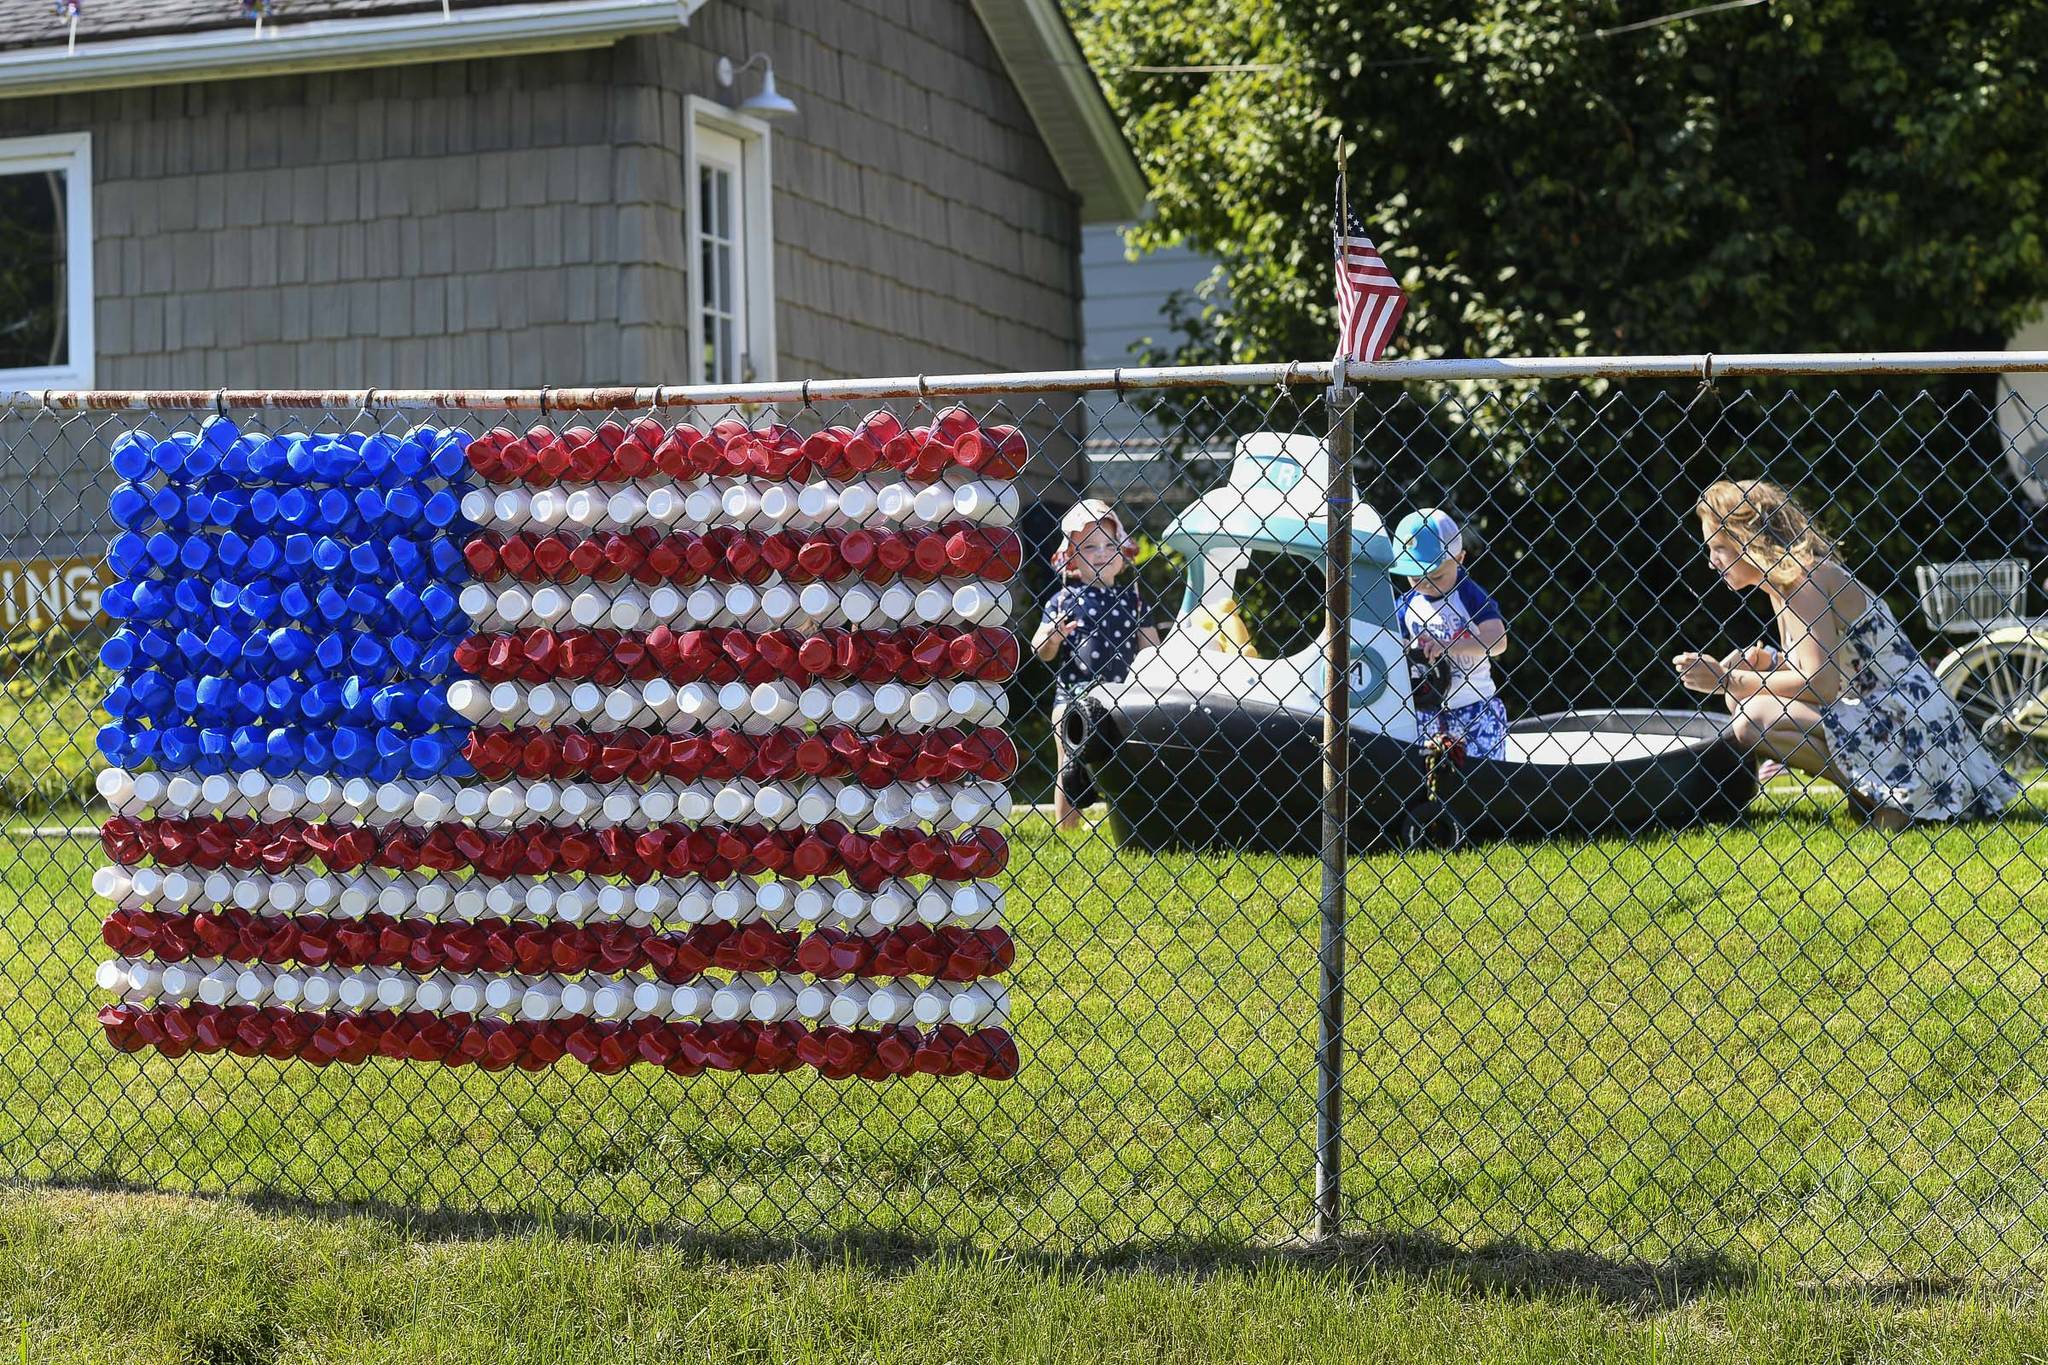 Caila McCoy watches as Presley and Jimmy play in a toy boat on 2nd Street in Douglas on Thursday, June 27, 2019. The home is one of a number of yards and business that decorate for the Fourth of July. (Michael Penn | Juneau Empire)